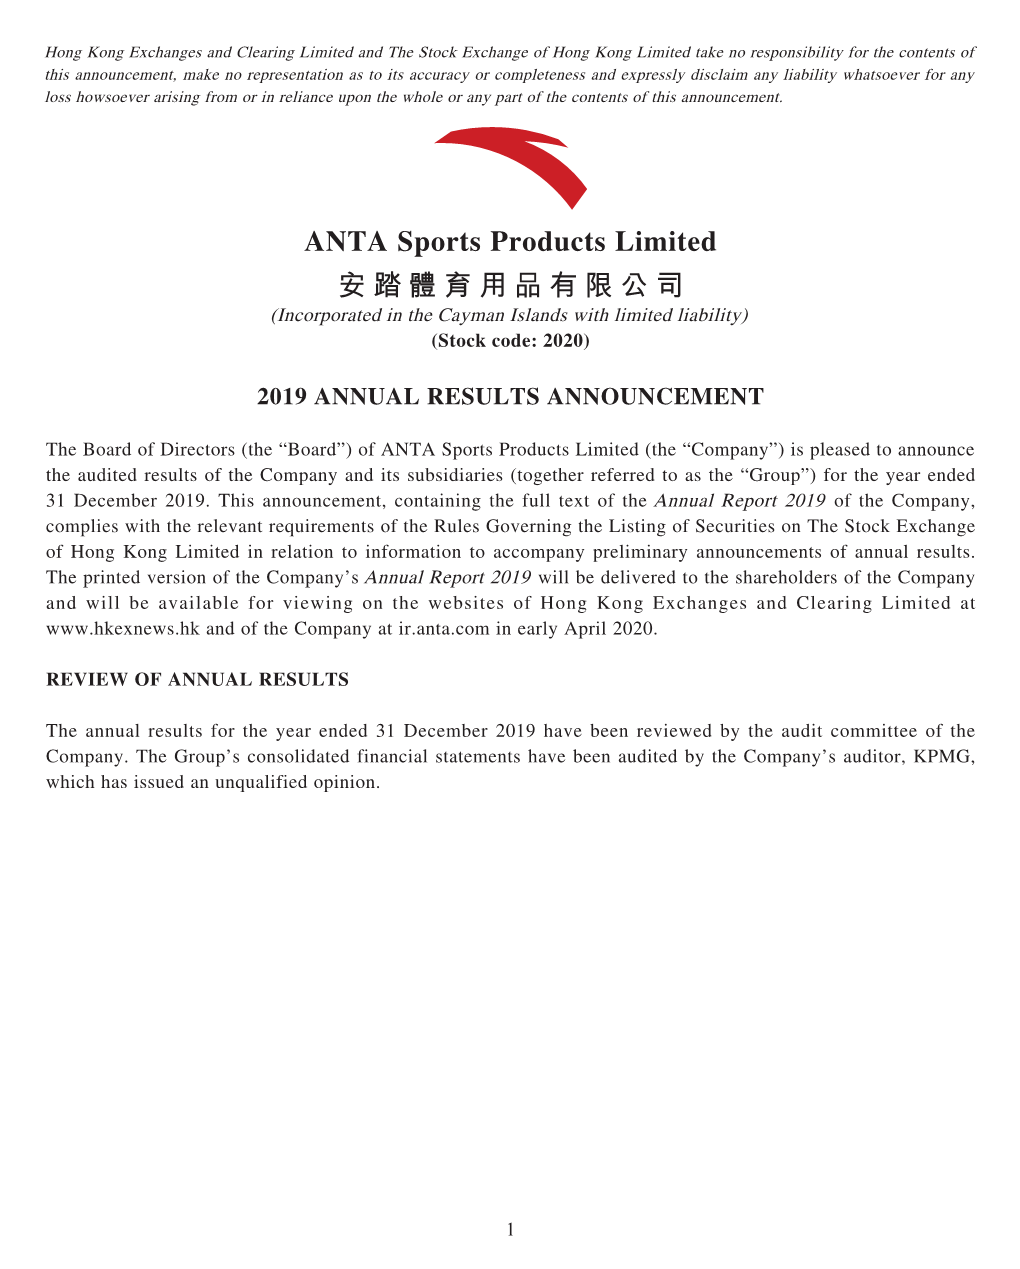 ANTA Sports Products Limited 安踏體育用品有限公司 (Incorporated in the Cayman Islands with Limited Liability) (Stock Code: 2020)